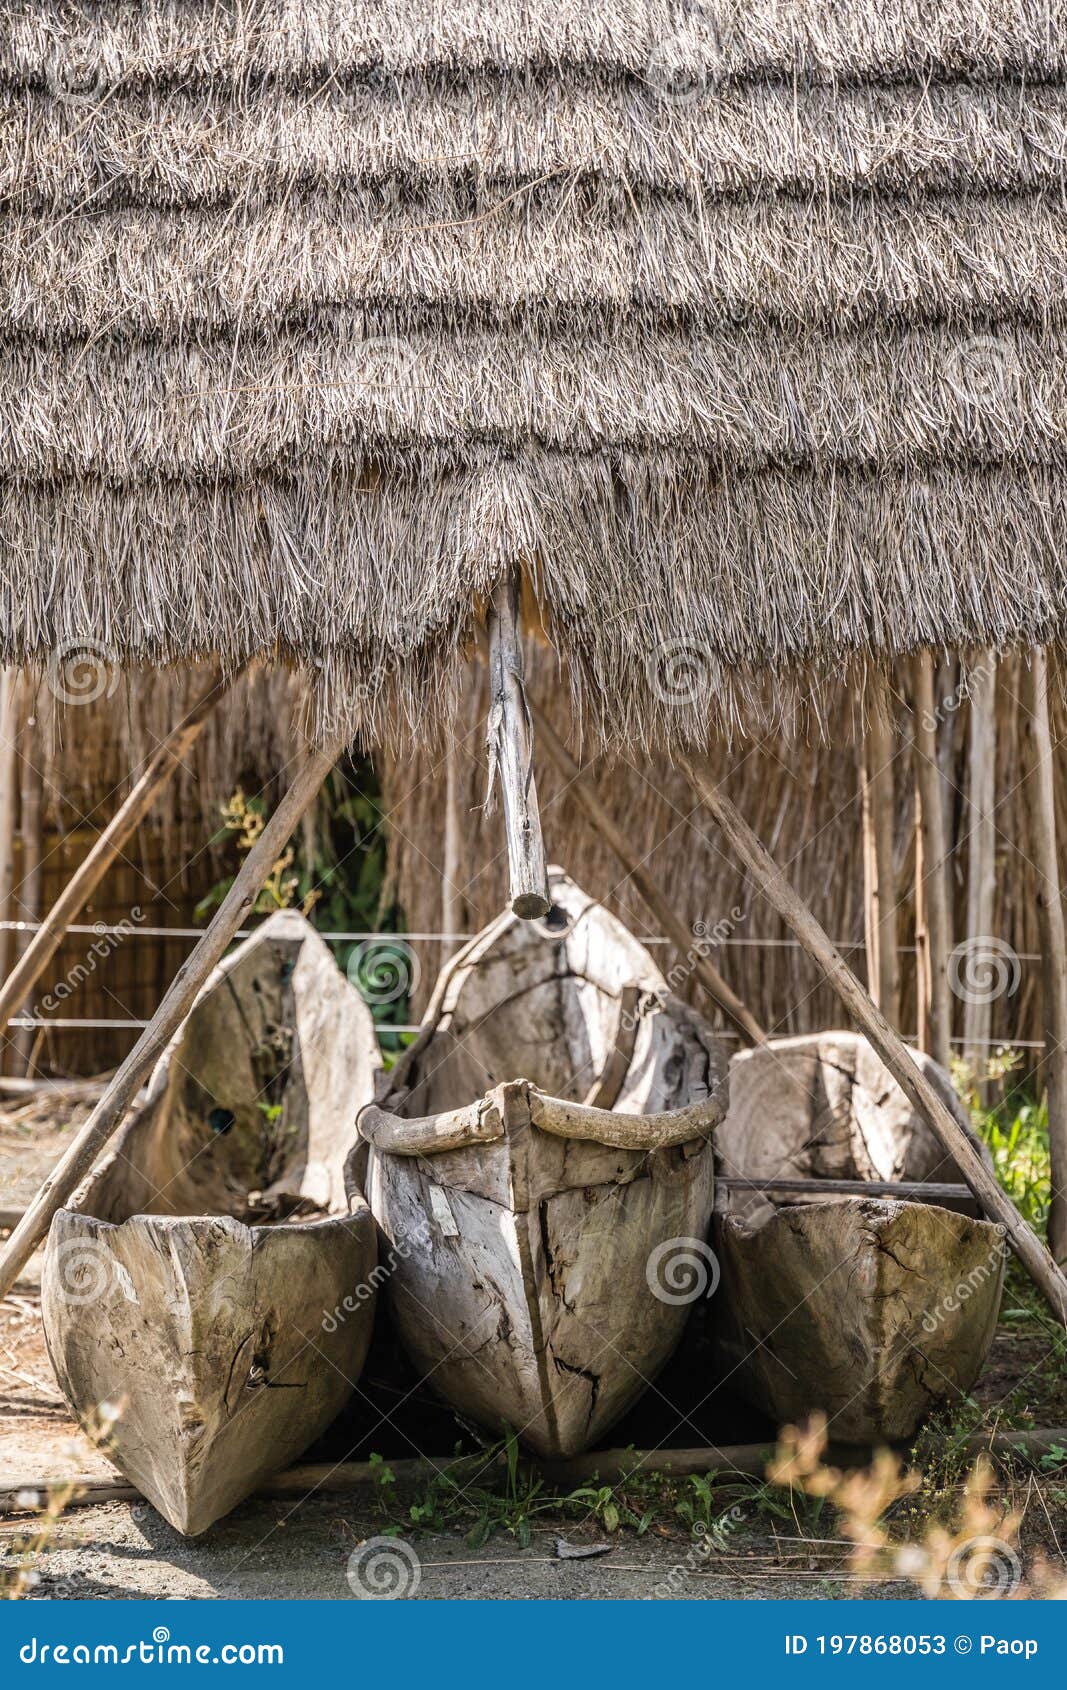 traditional wooden fishing pirogues